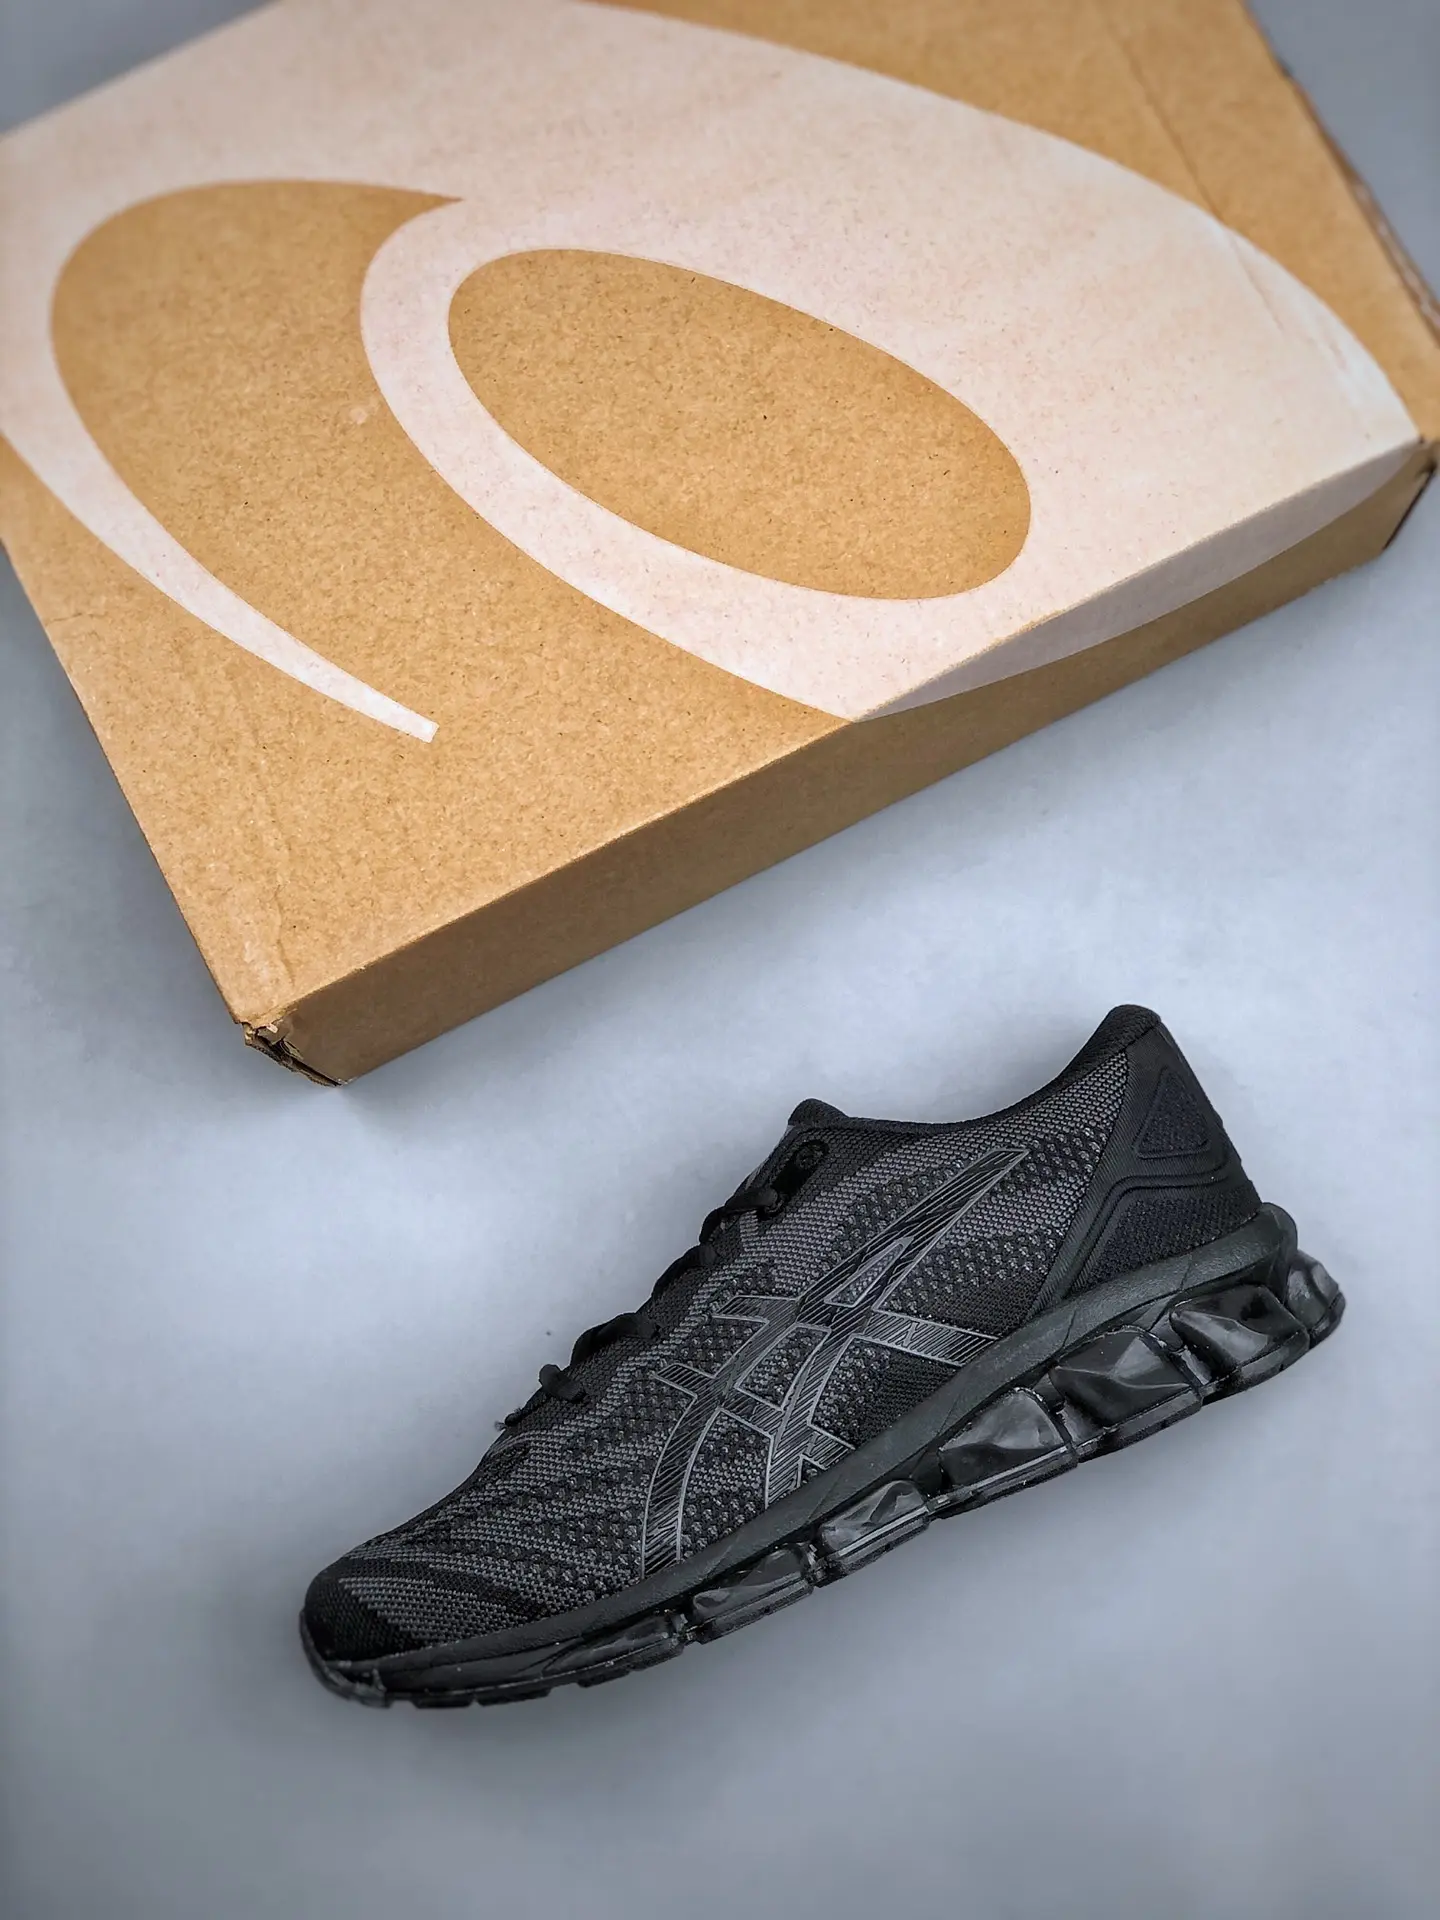 YASSW | Do Asics Run Small or Big? Guide to Finding the Right Fit with ASICS Running Shoes